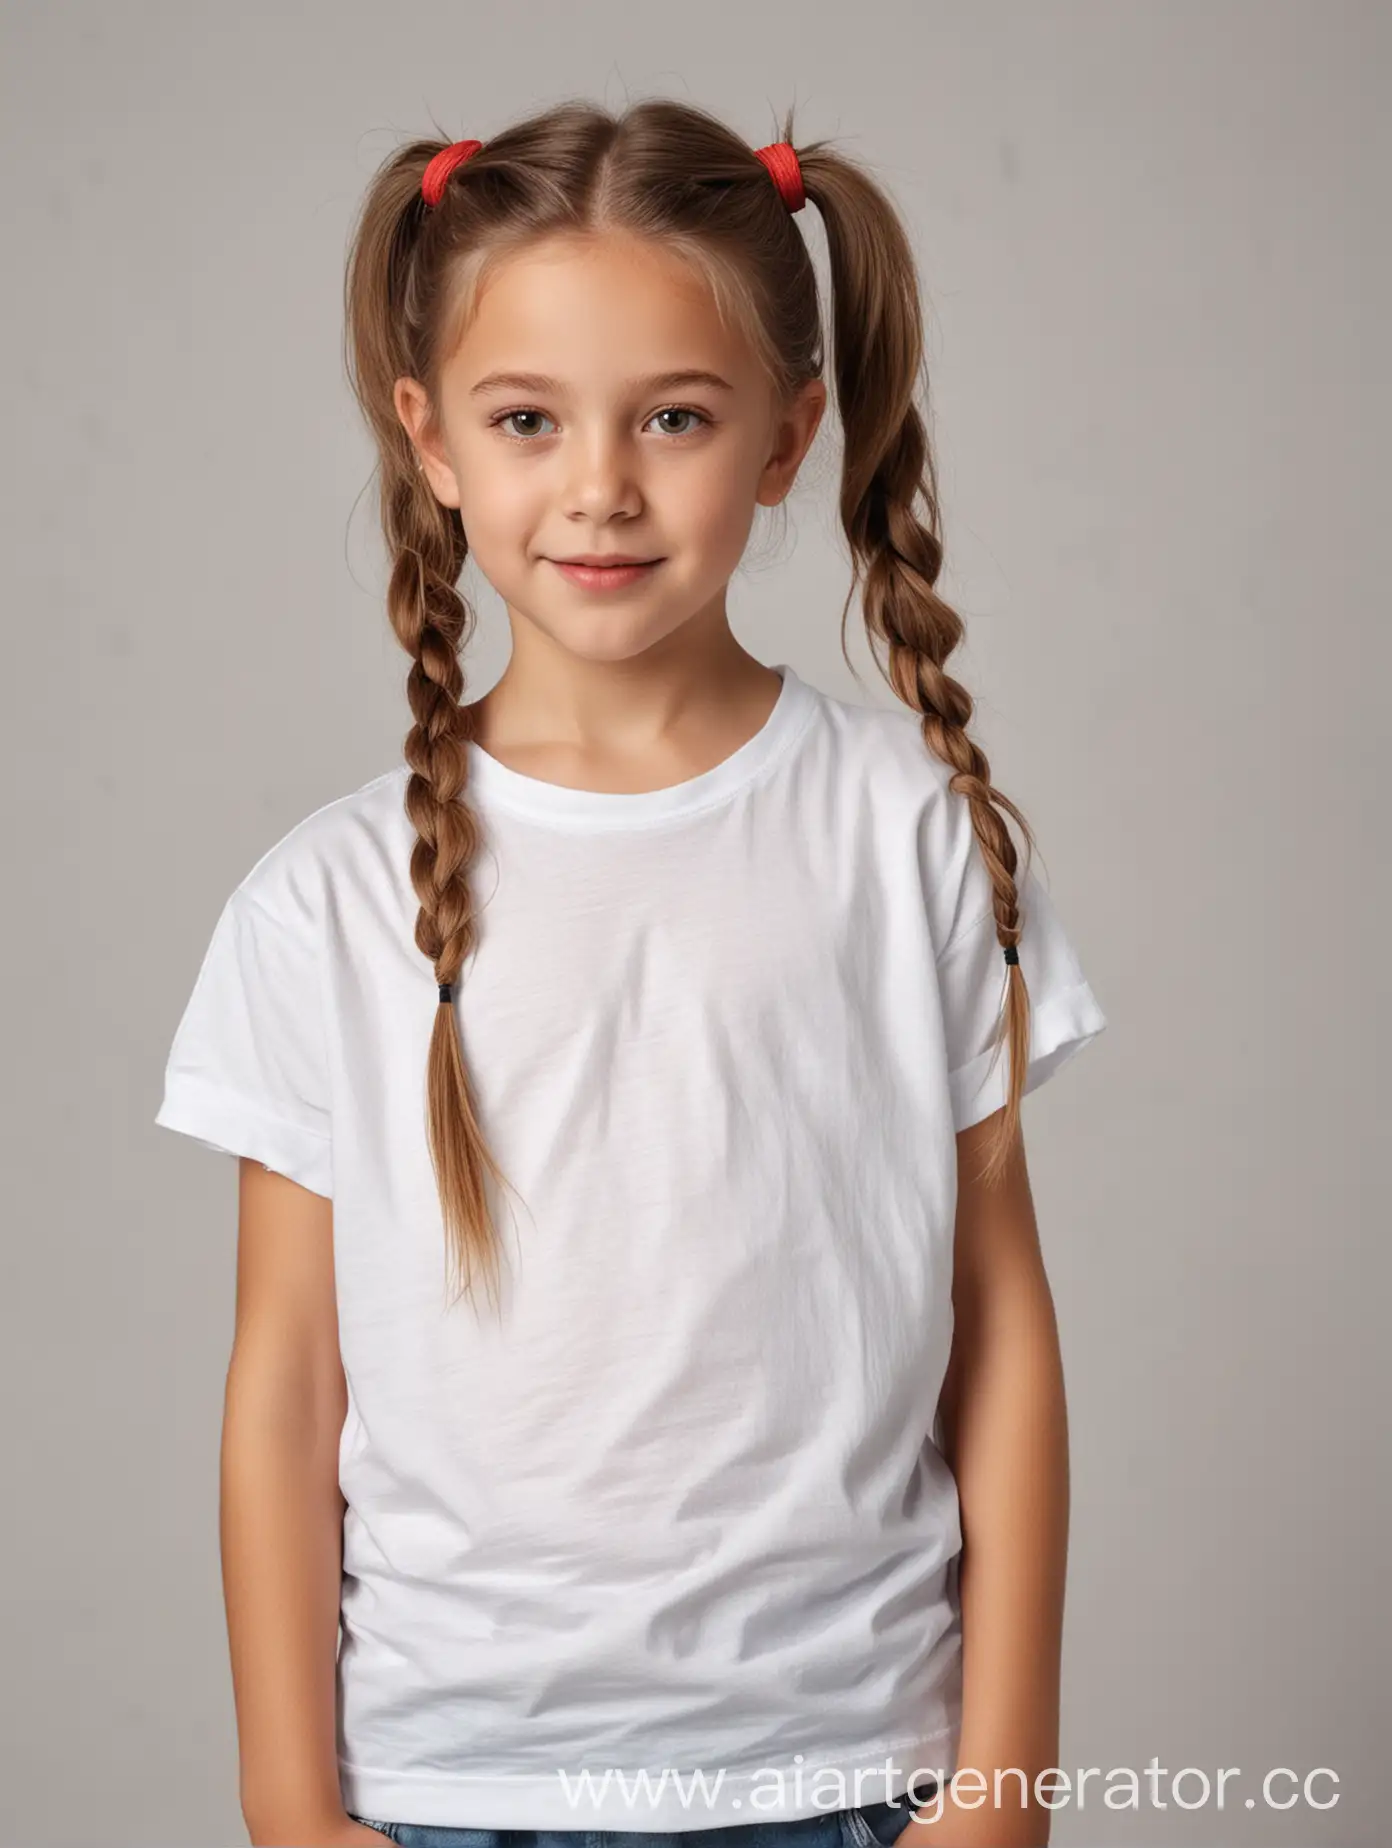 Young-Girl-Model-in-White-TShirt-Age-7-Fair-Hair-in-Ponytails